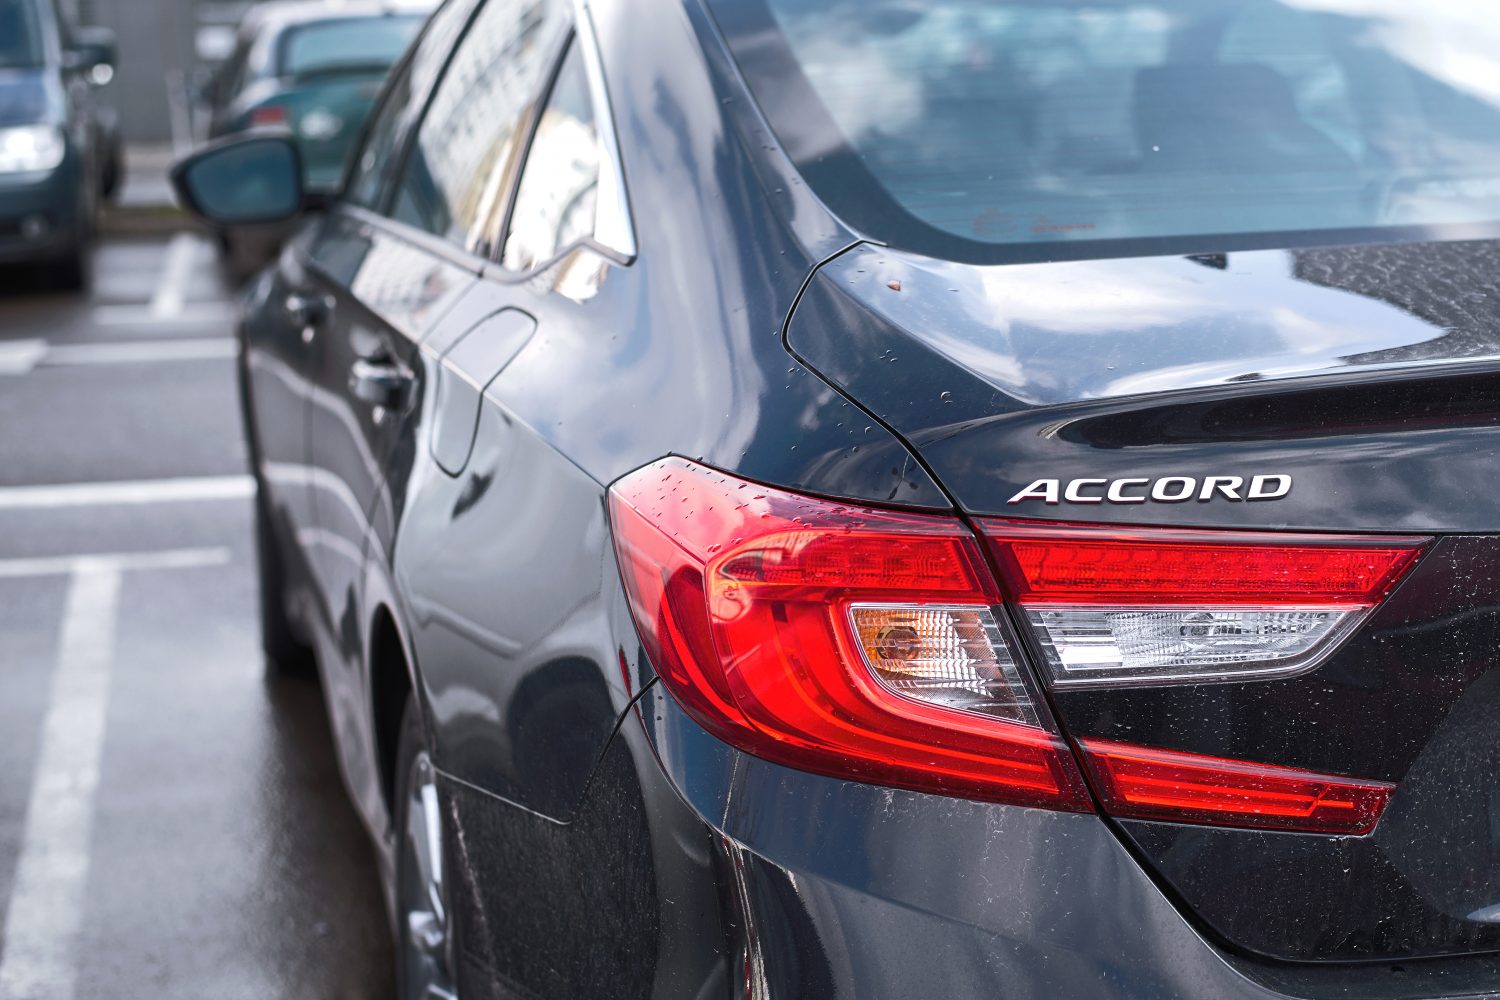 According to notices, Honda and Stellantis issued a recall for more than 300,000 Accords, HR-V, and hybrid Jeep Wrangler SUVs. 